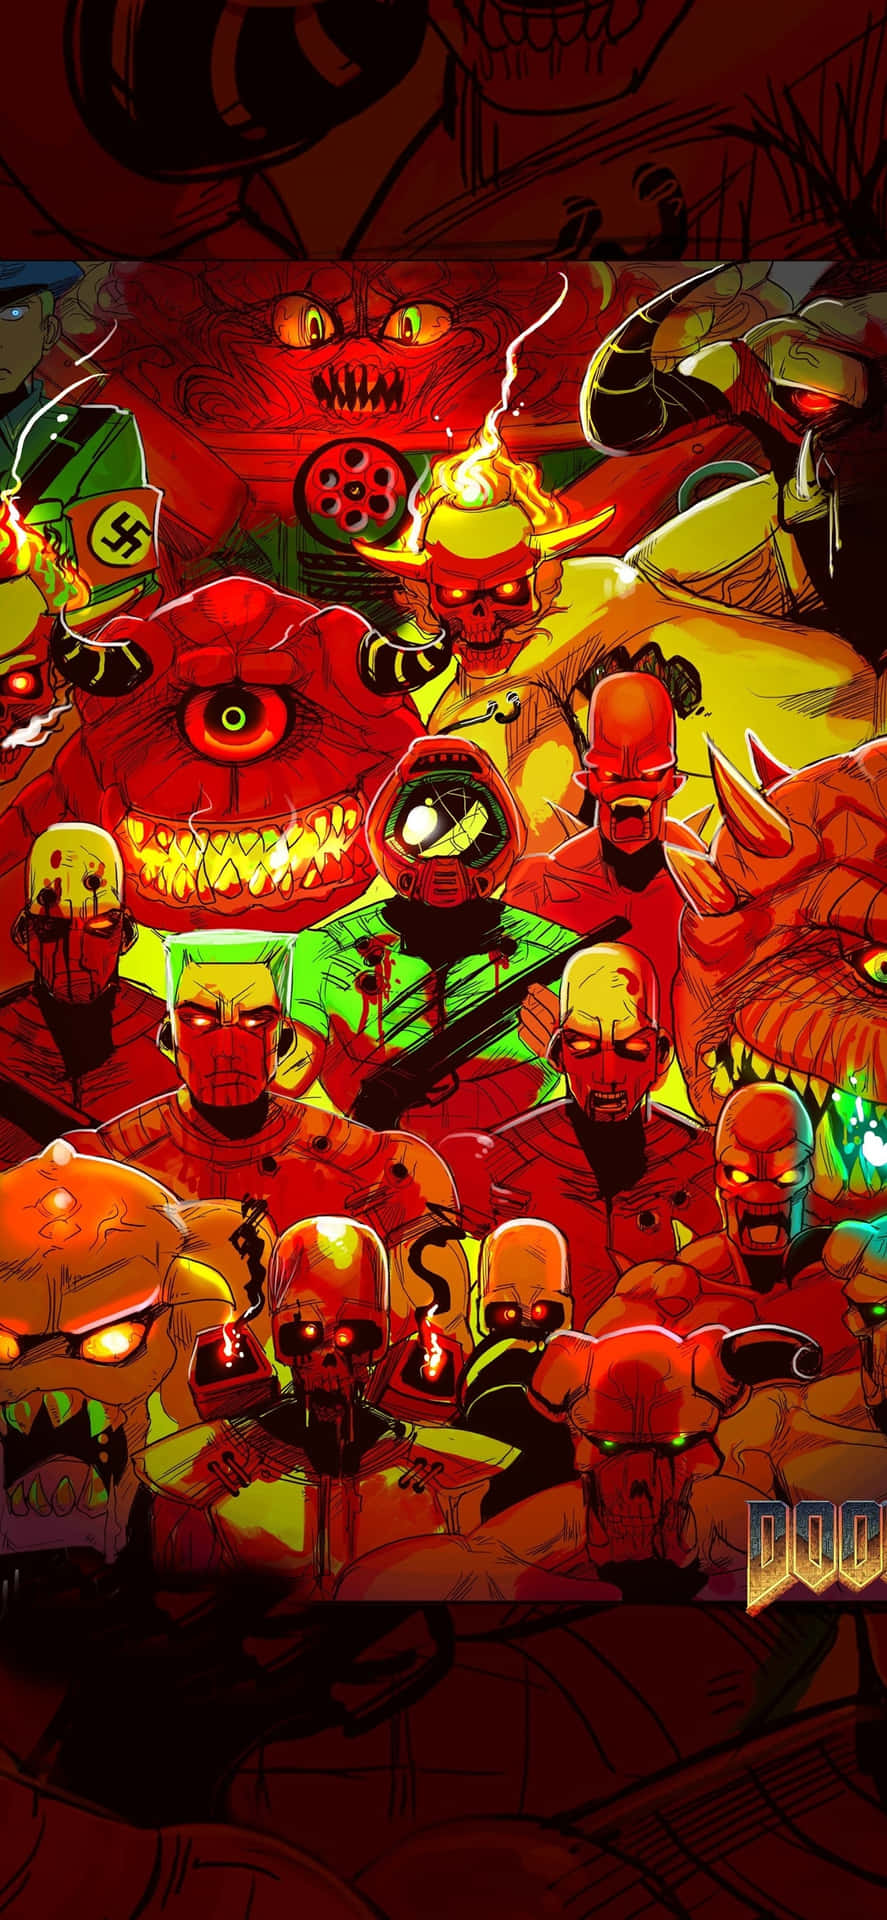 'Explore the Depths of DOOM Over Your iPhone and iPad' Wallpaper